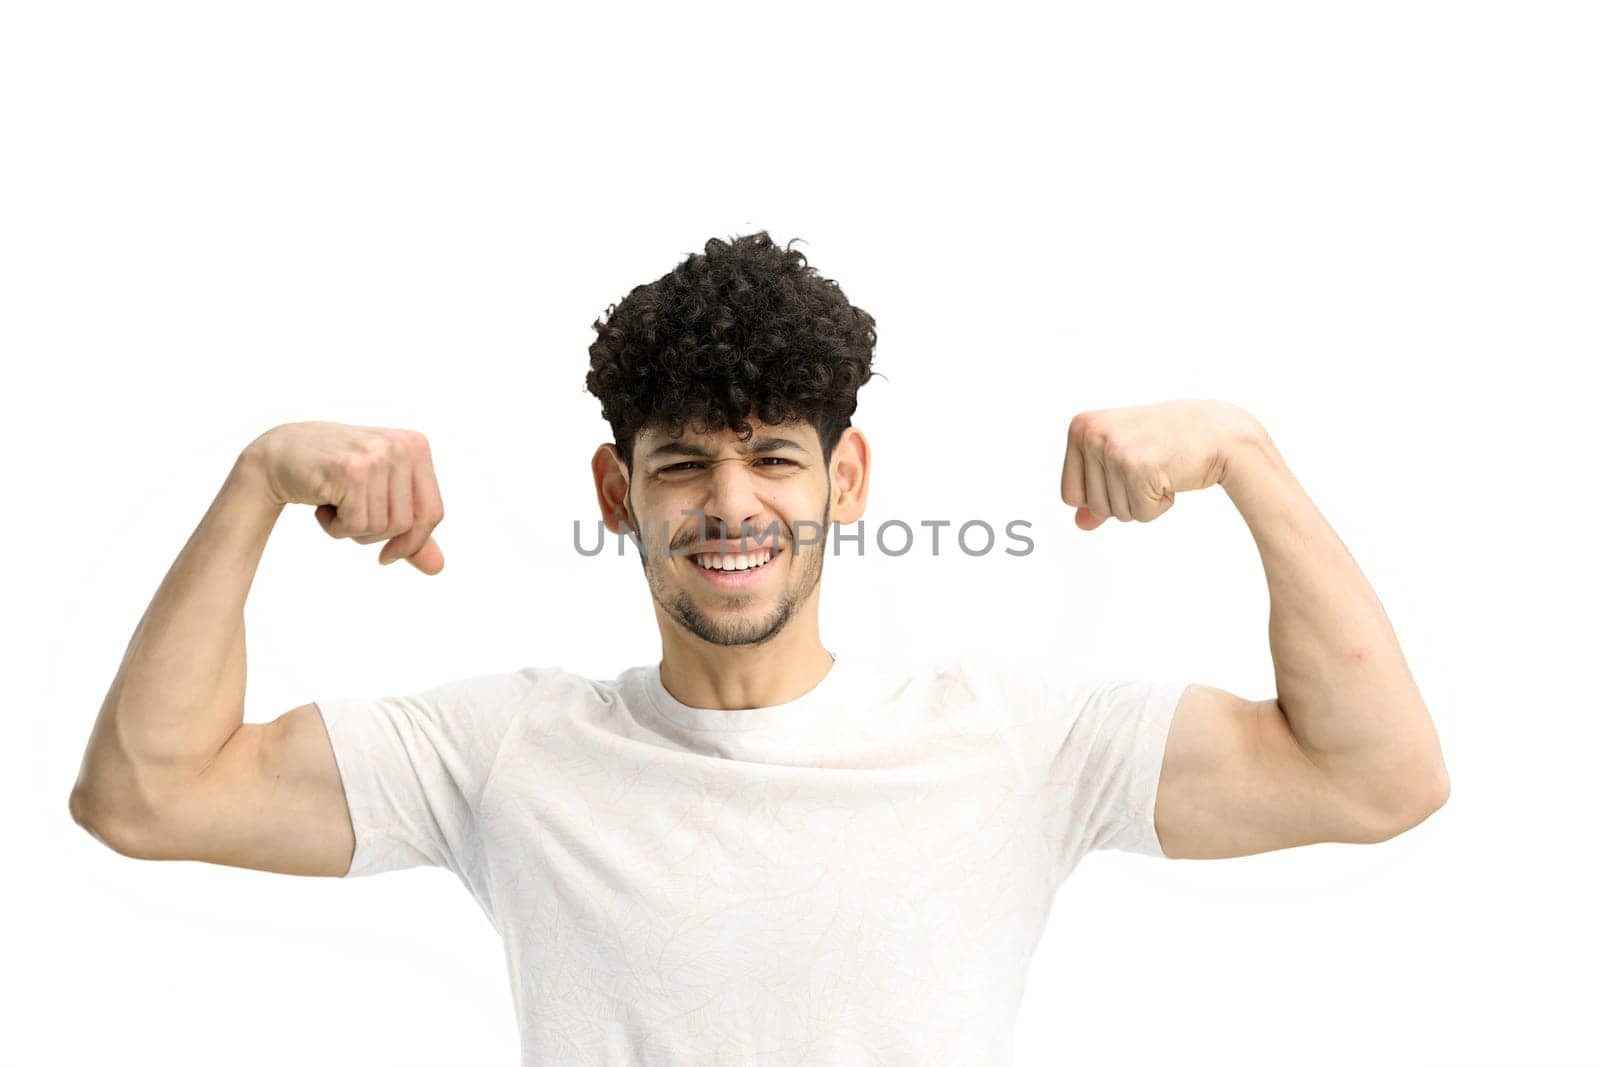 A man, on a white background, close-up, shows strength by Prosto